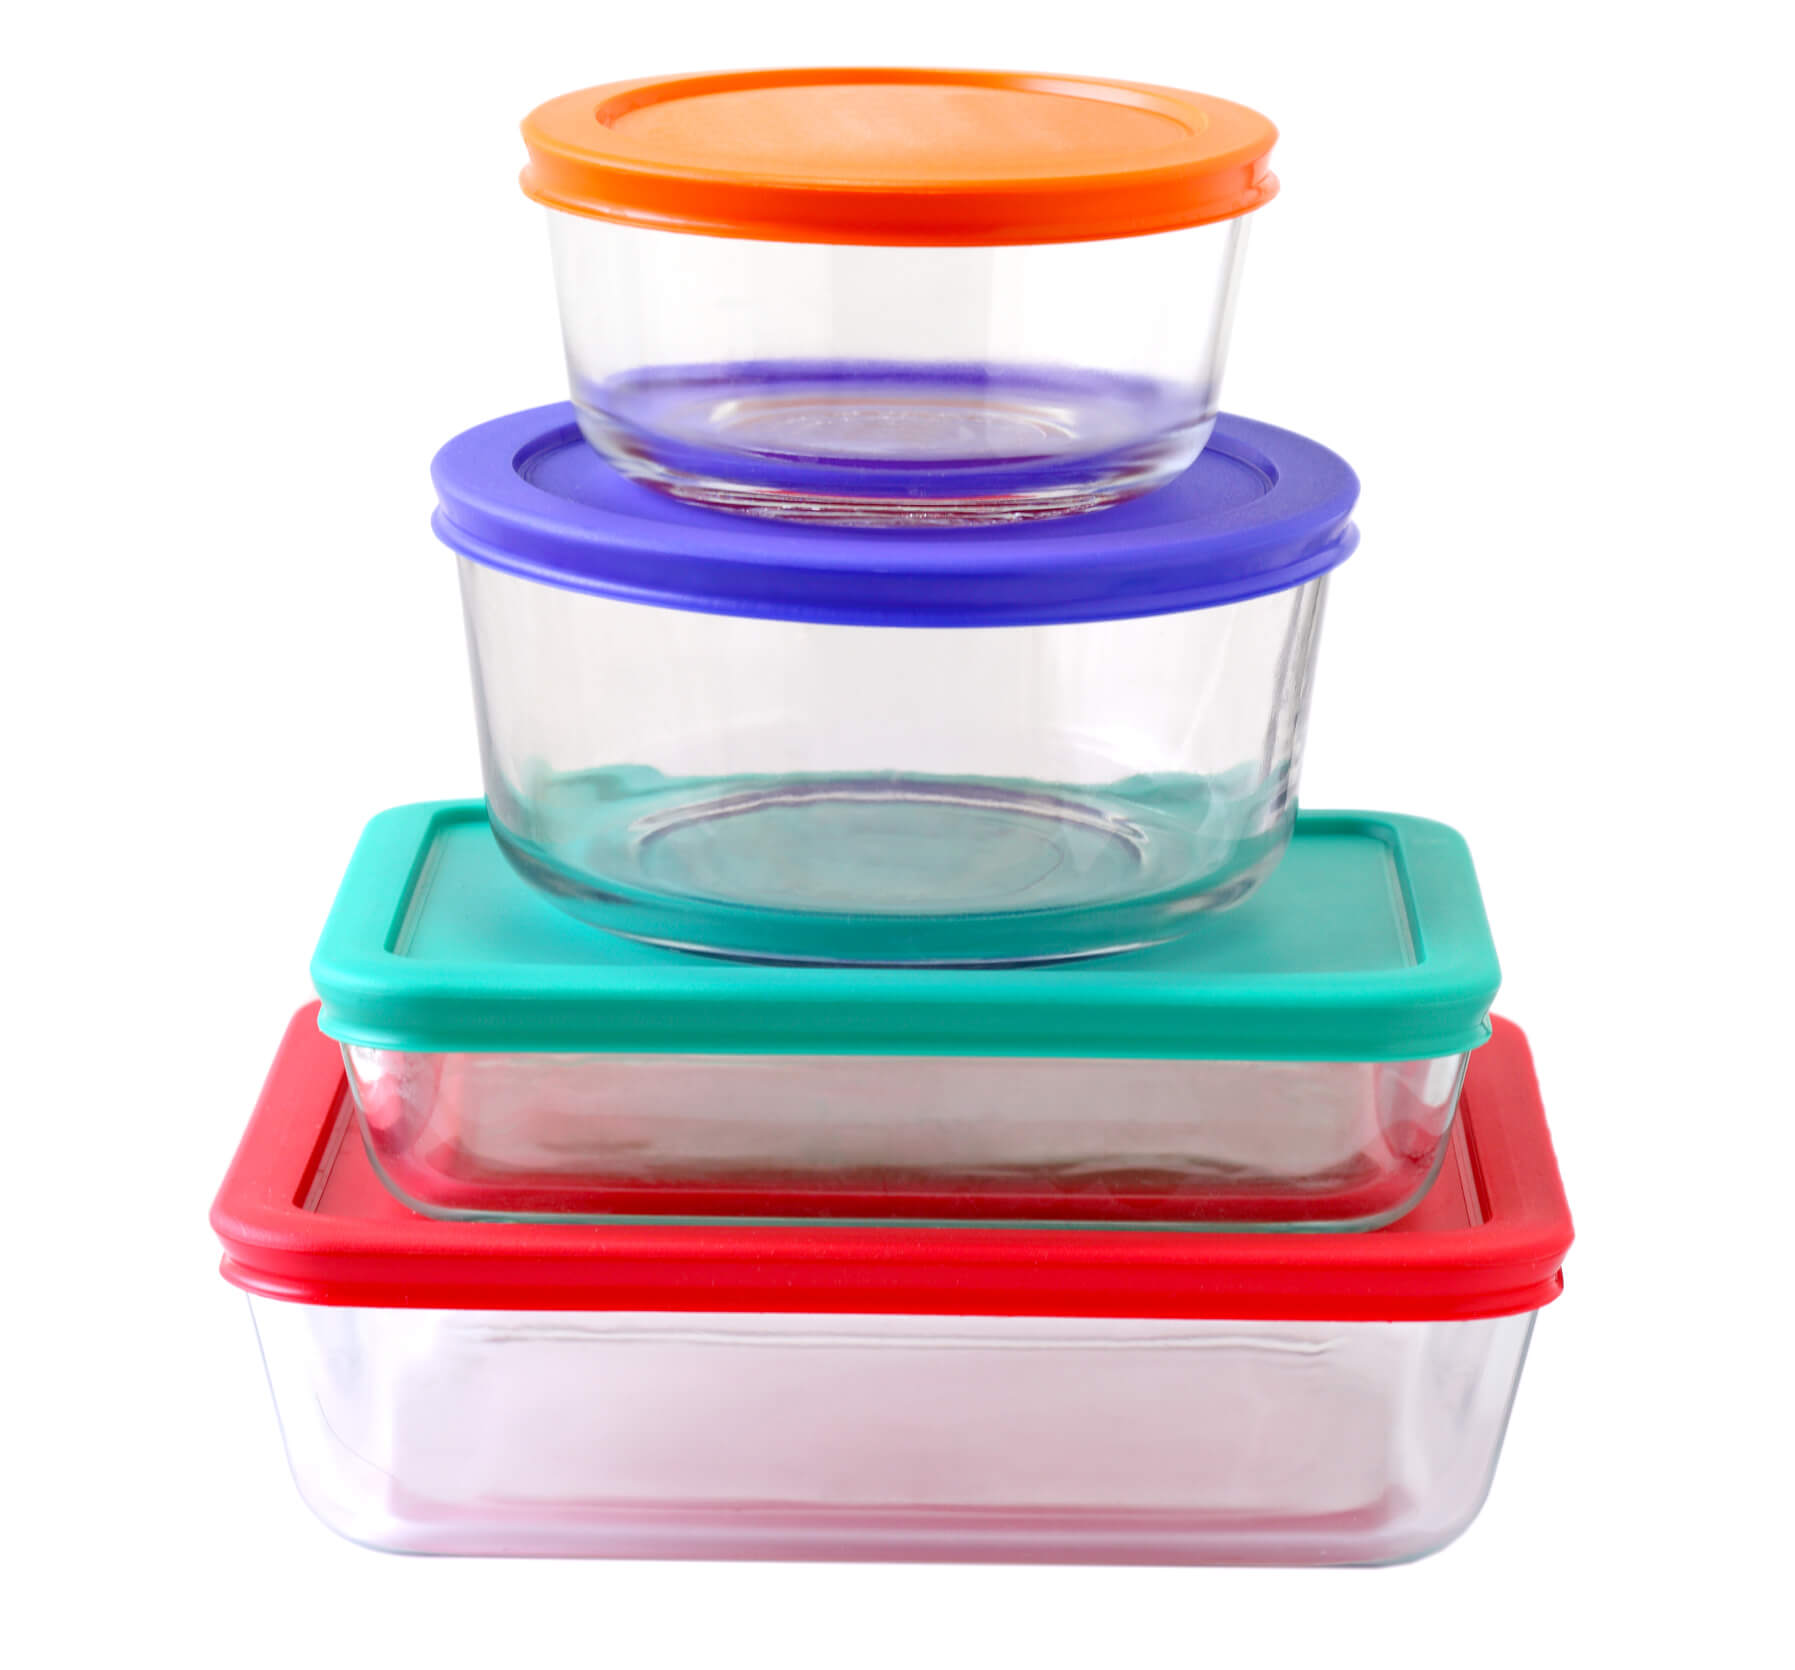 5 Non-Plastic Food Storage Containers We Can't Live Without